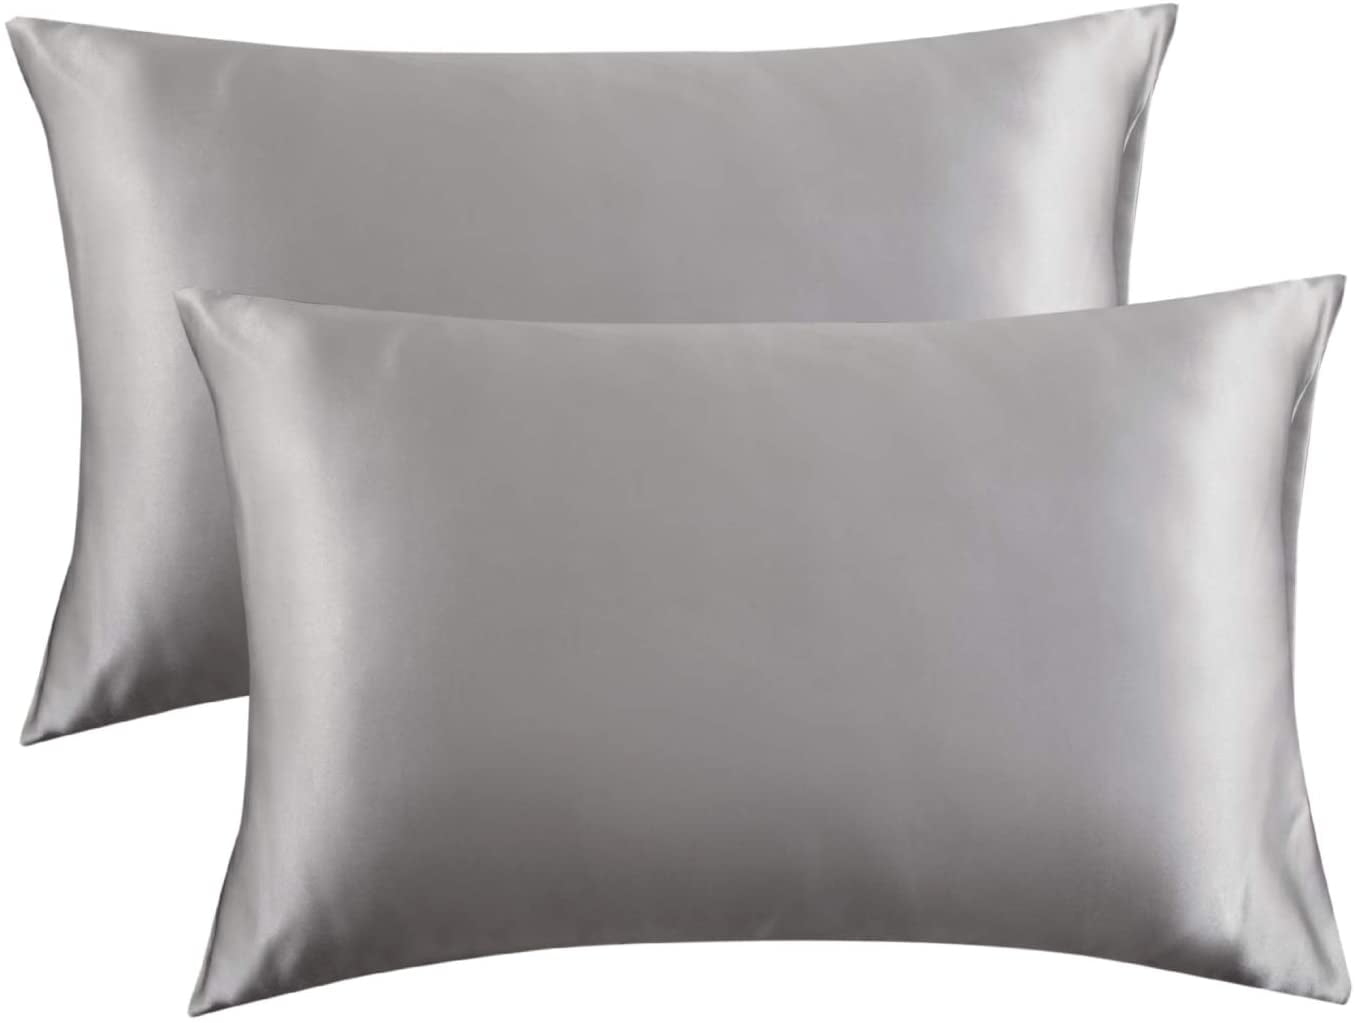 Details about   Satin Luxury Pillowcases Large Queen Size 20 x 30 Pillows Set of 2 Choose Color 